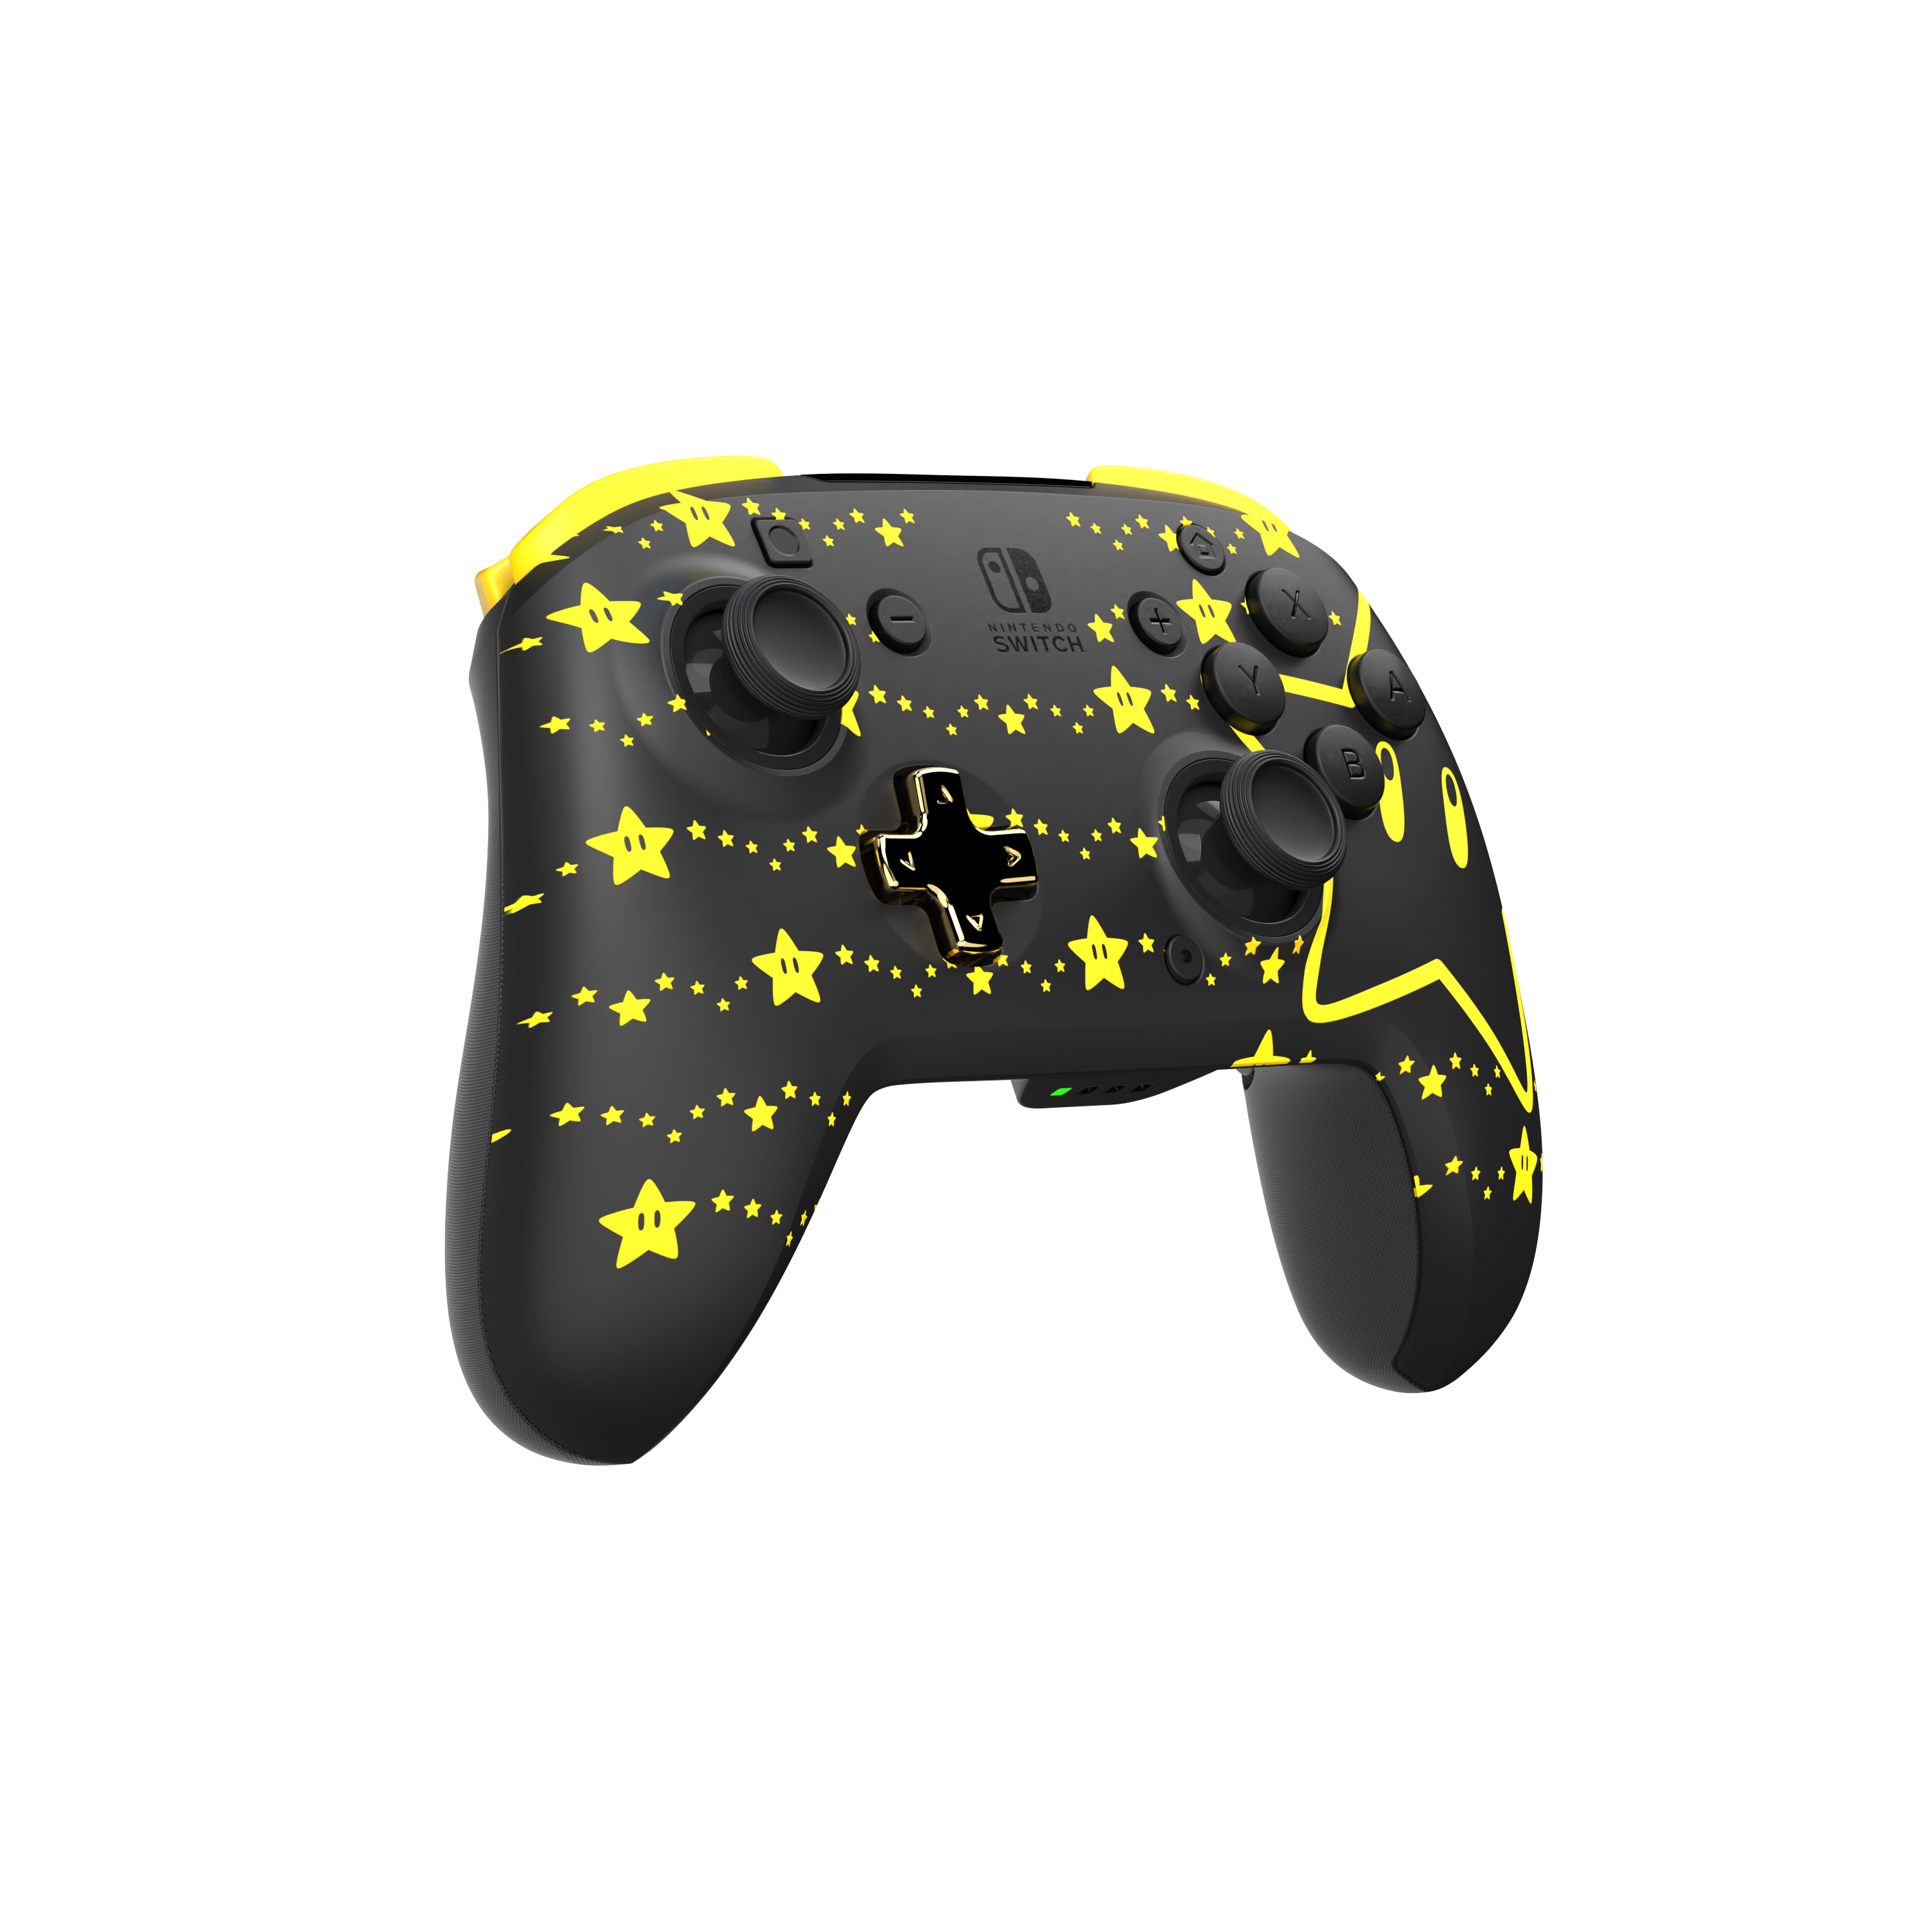 PDP REMATCH GLOW Wireless Controller for Nintendo Switch, Nintendo Switch - OLED Model, and Nintendo Switch Lite Super Star